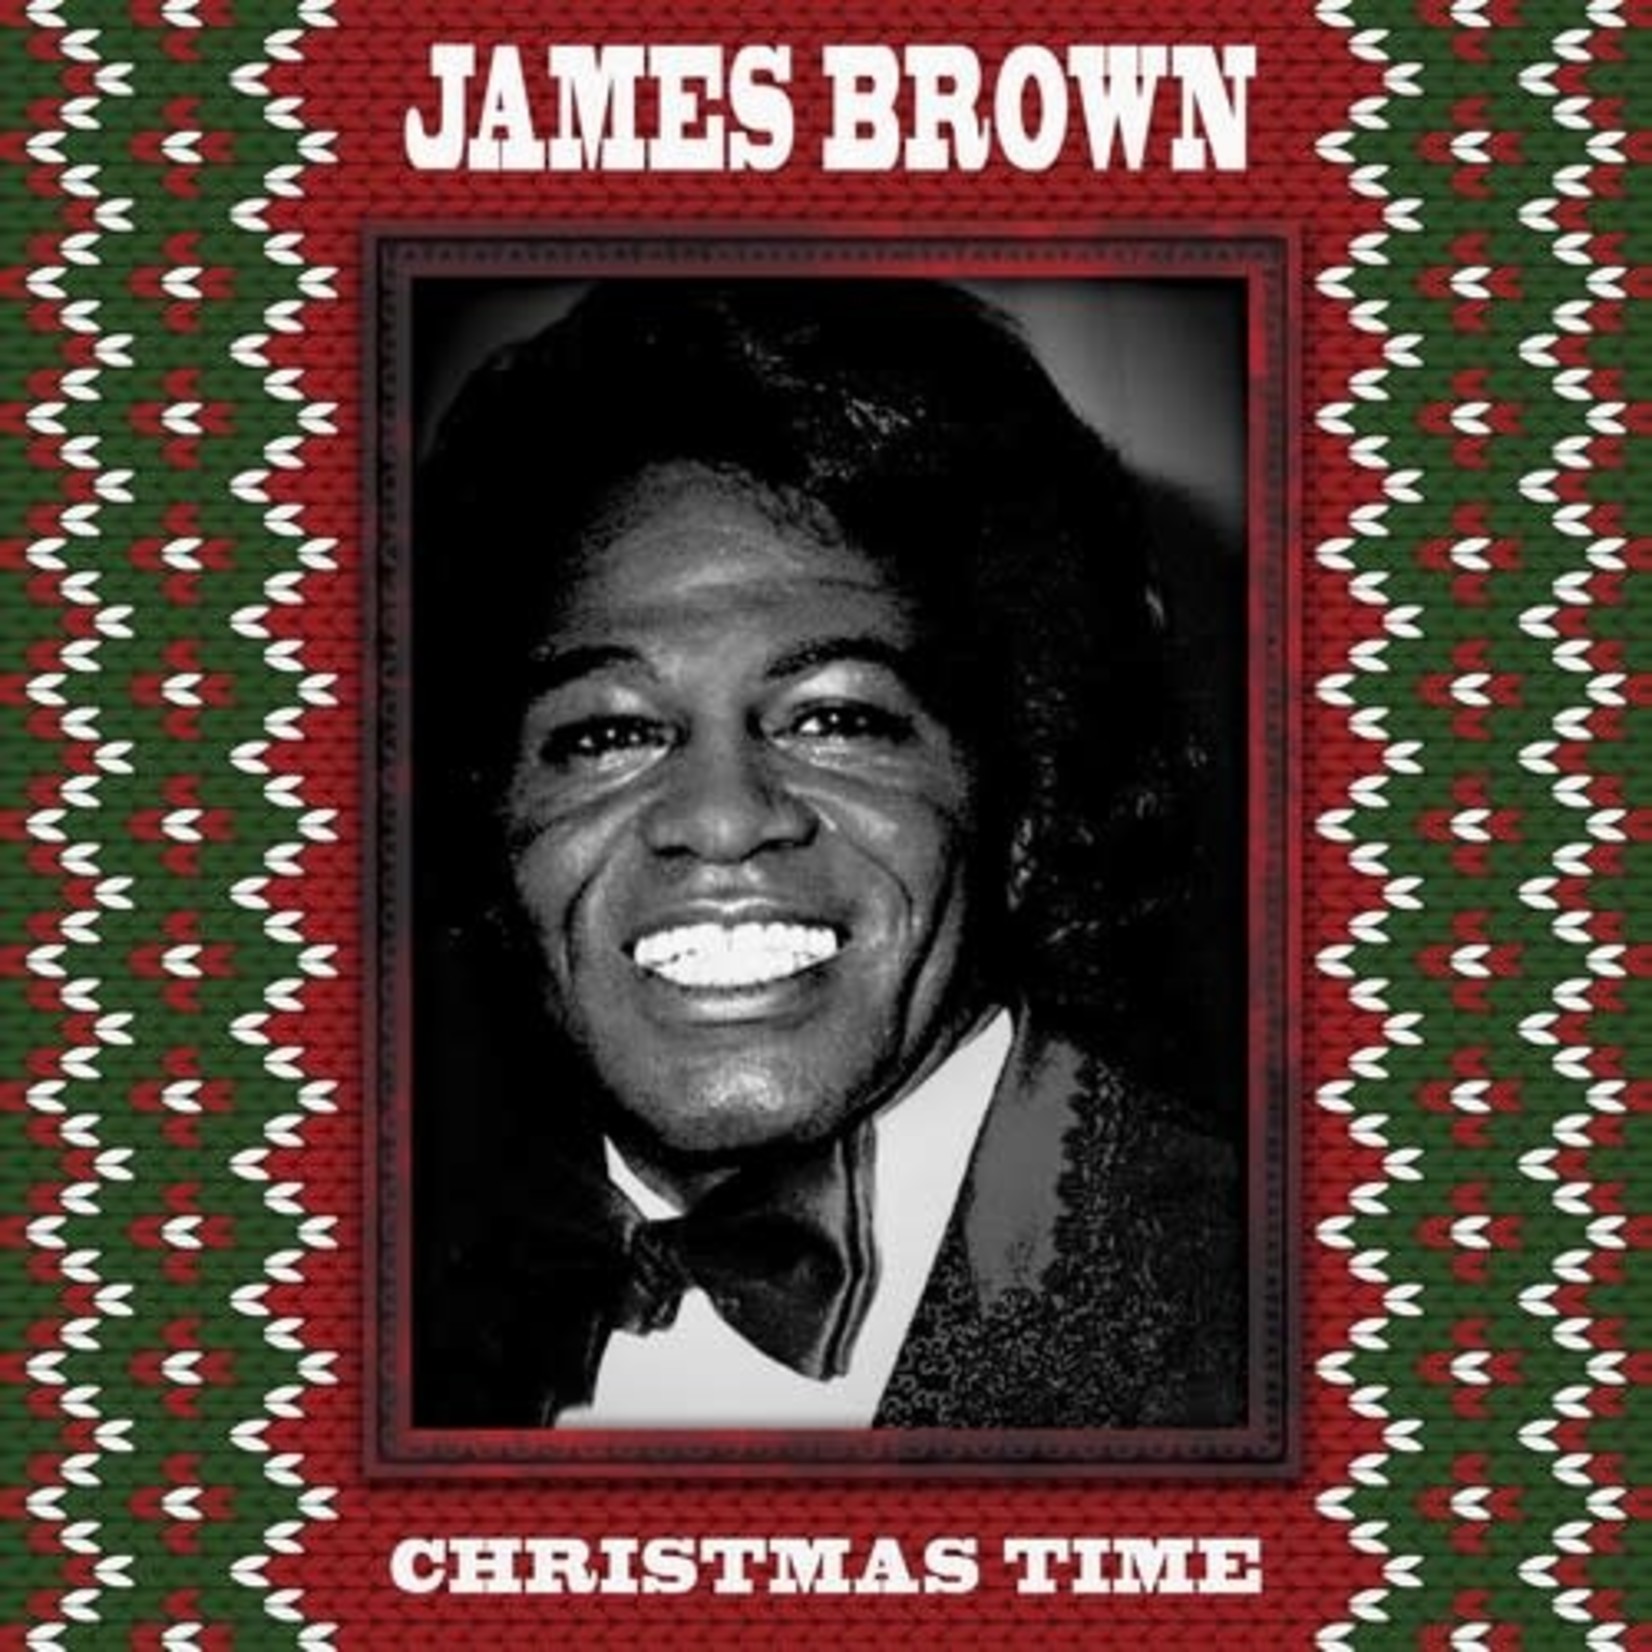 Cleopatra James Brown - Christmas Time (LP) [Red]